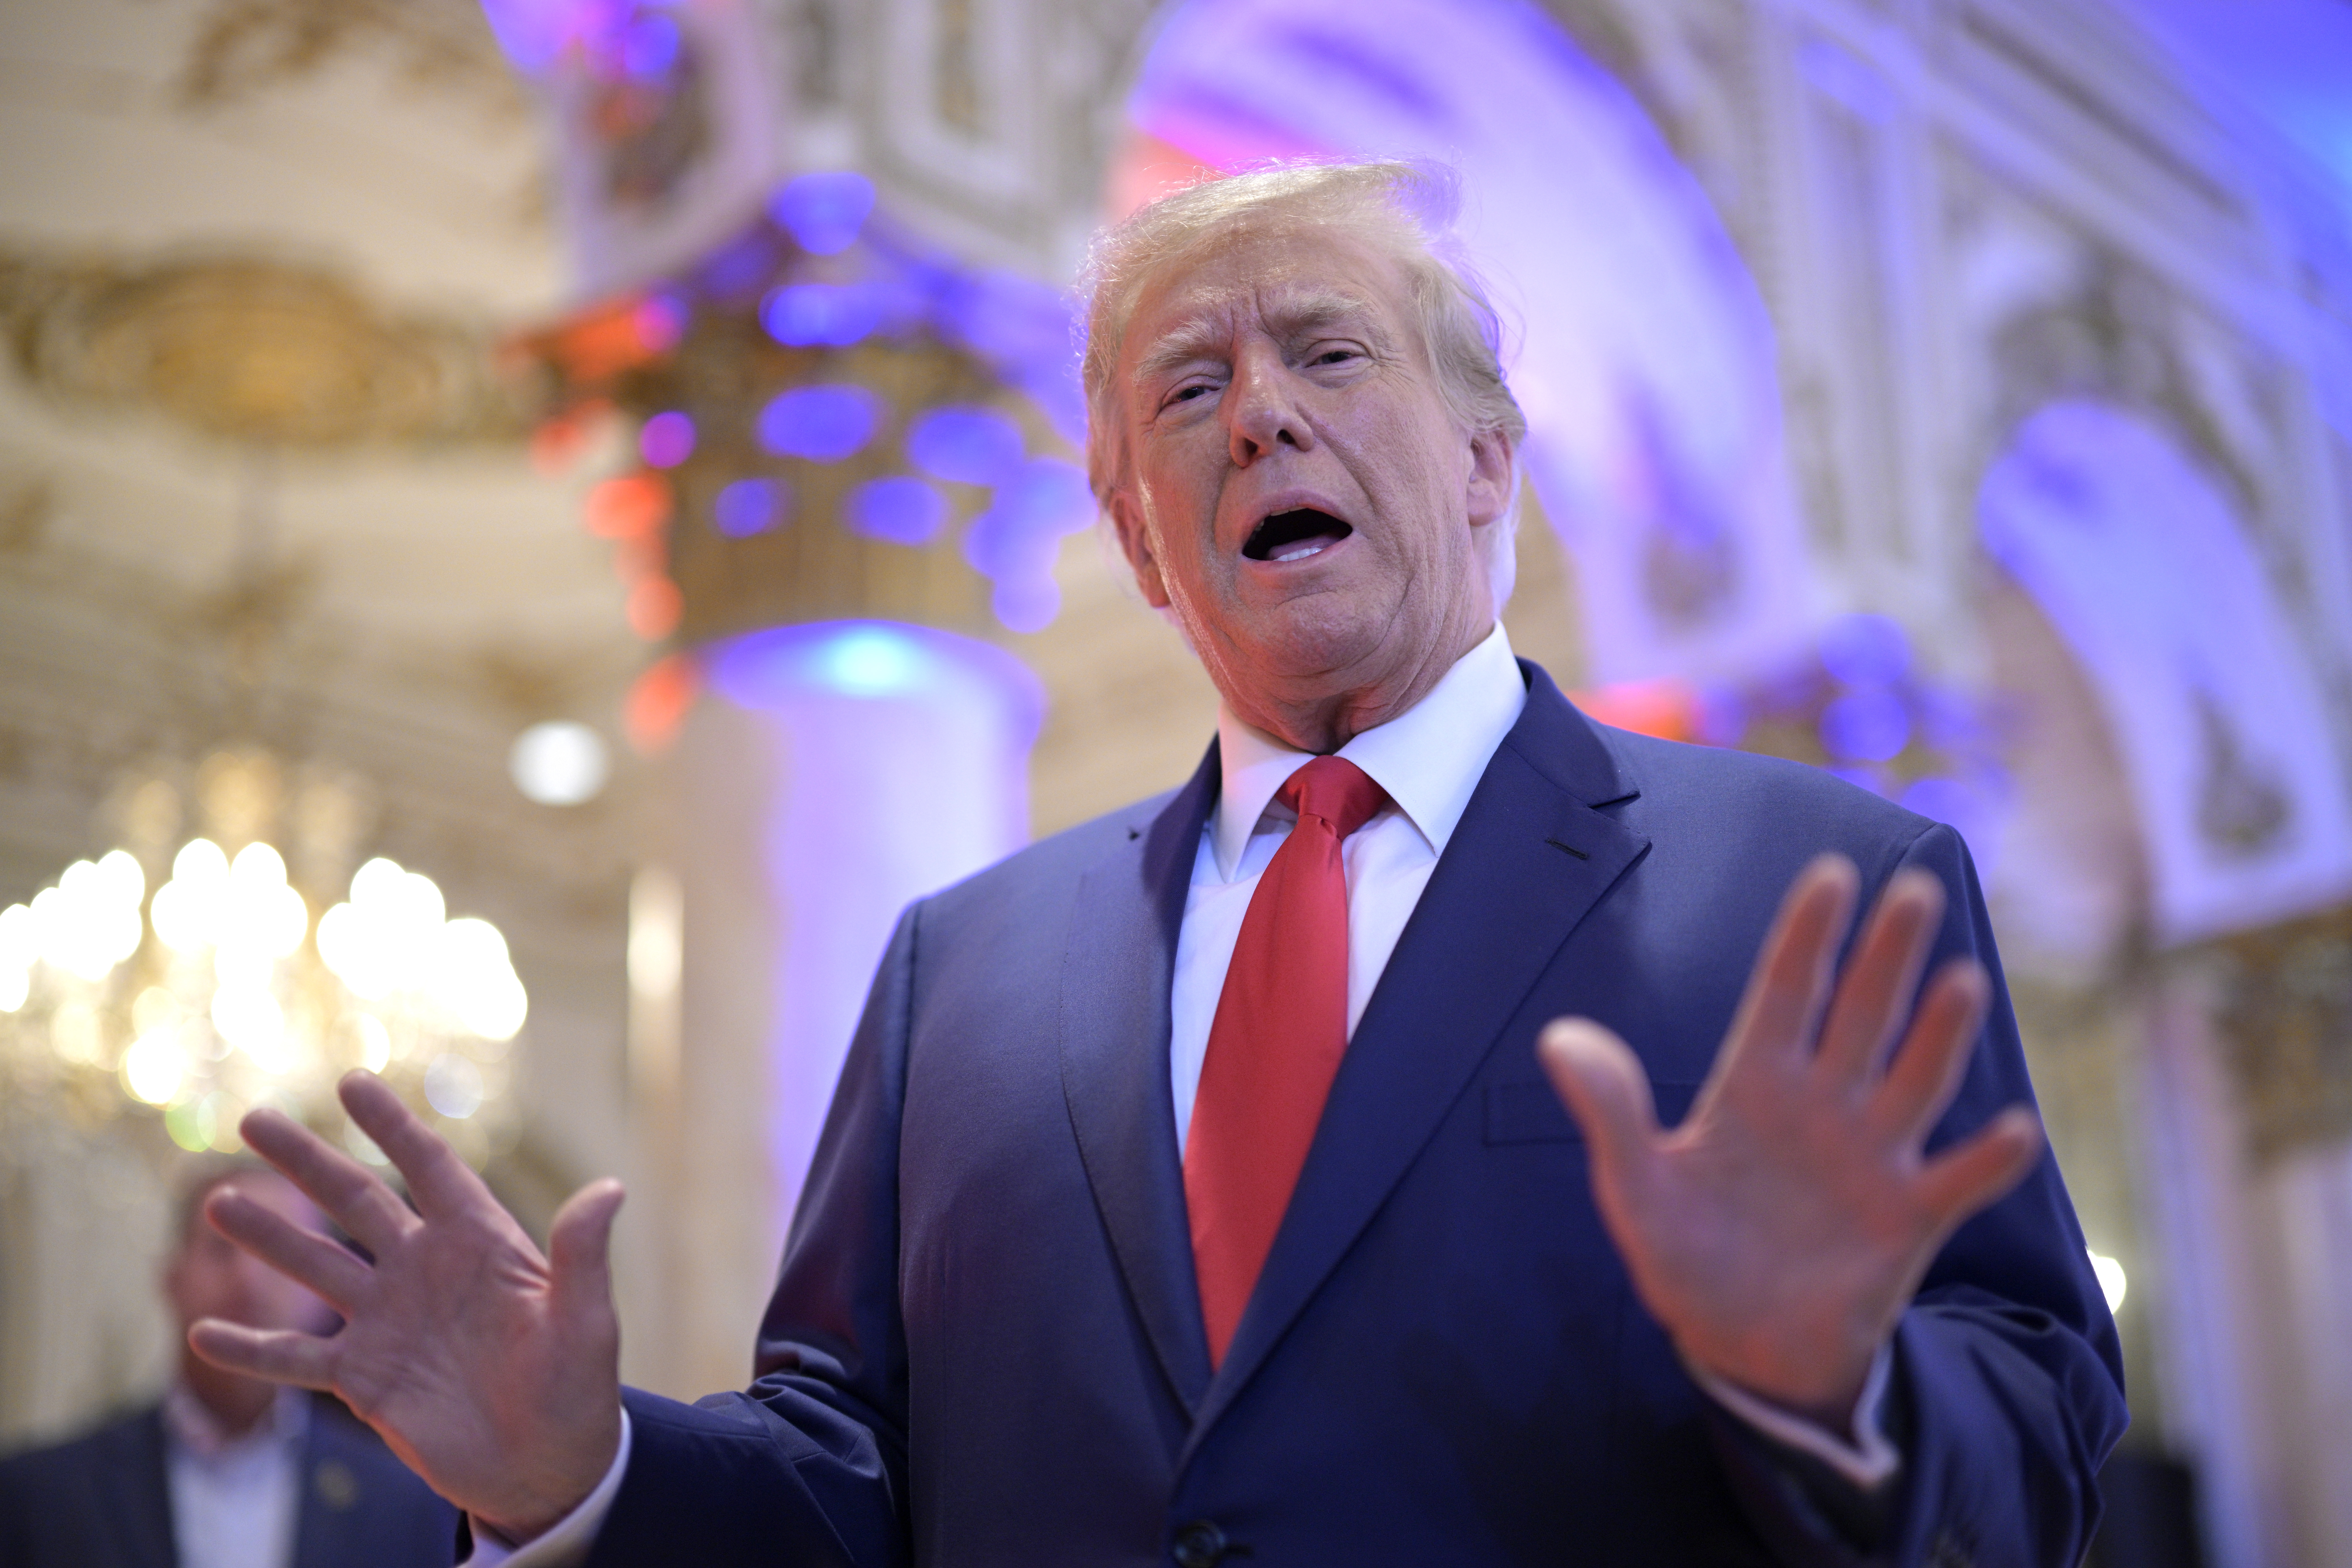 Former President Donald Trump answers questions from reporters during an election night party at Mar-a-Lago, Tuesday, November 8, 2022 in Palm Beach, Florida.